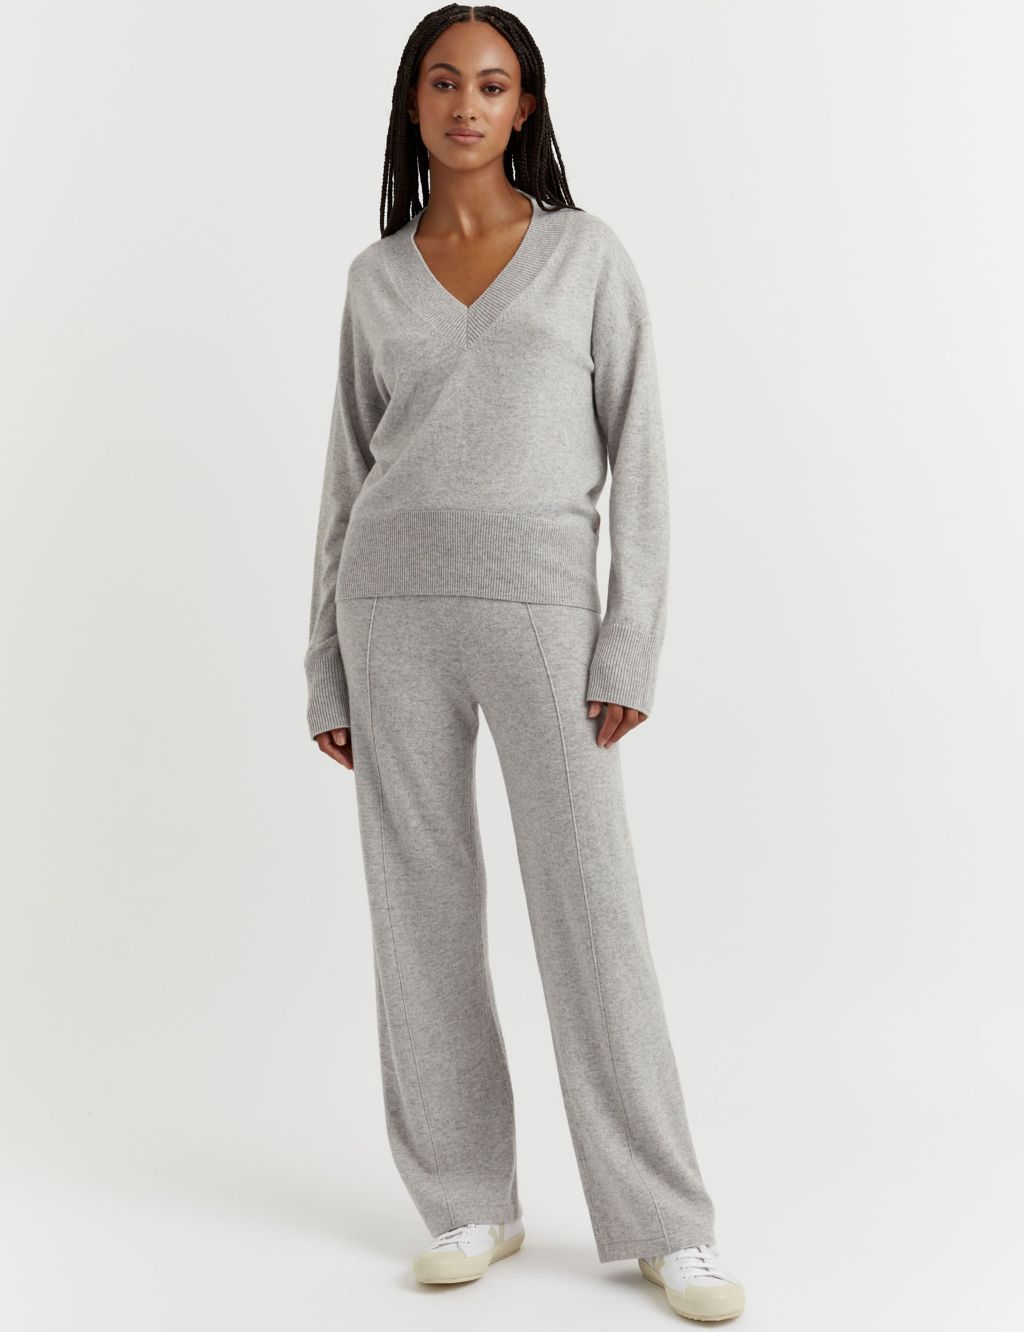 Wool Rich Relaxed Jumper with Cashmere image 1